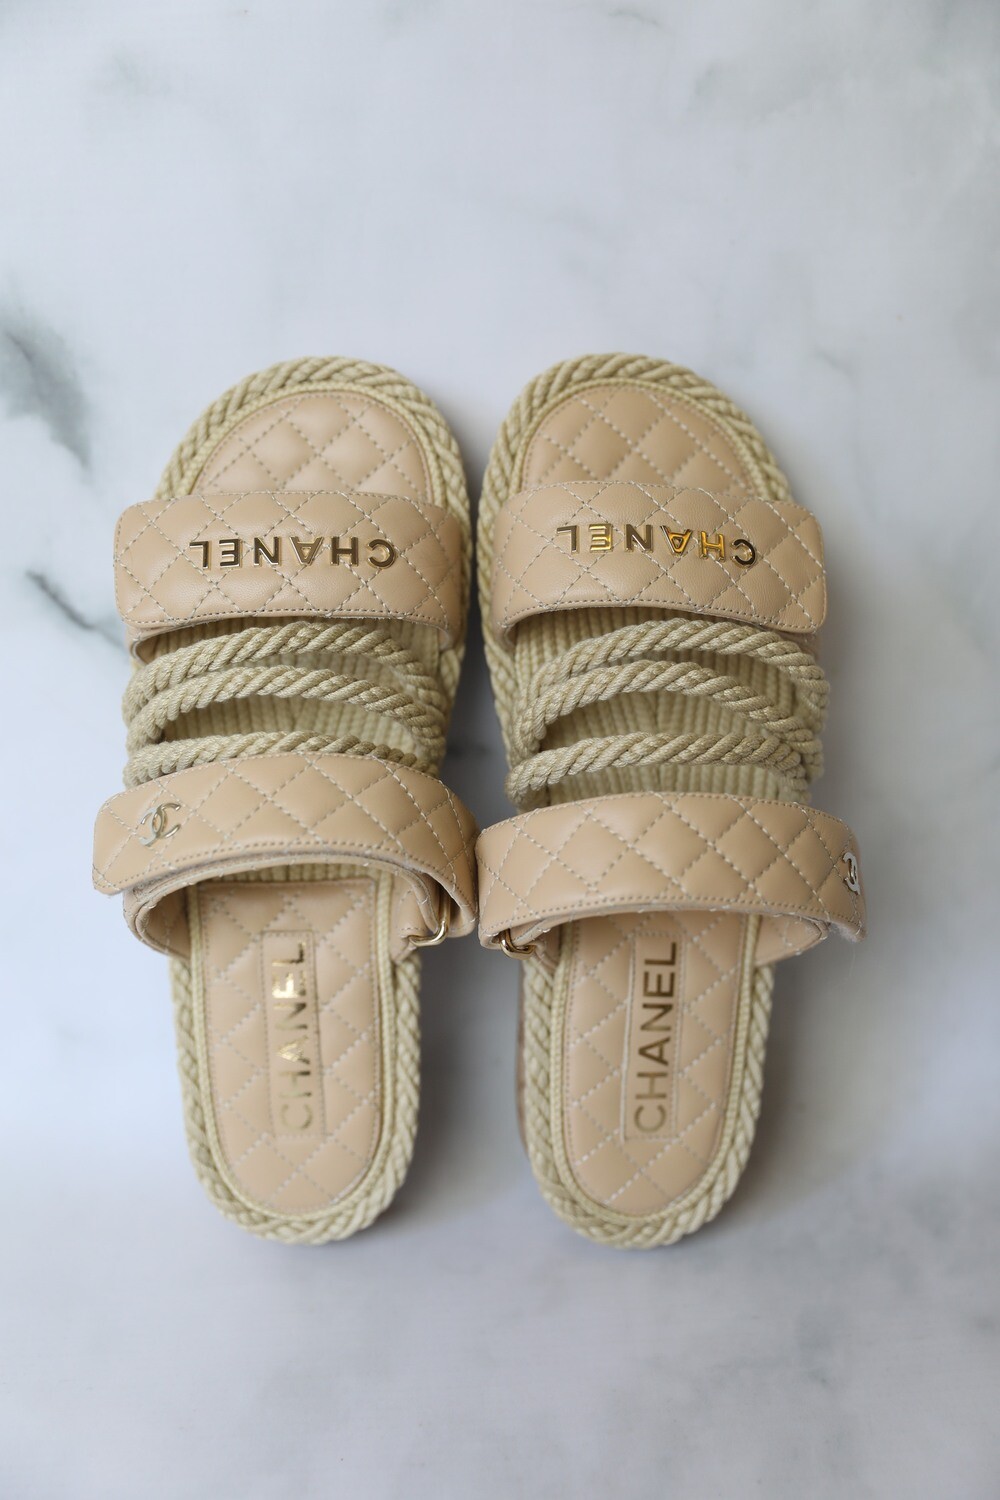 Chanel Rope Sandals, Beige, Size 39, New in Box WA001